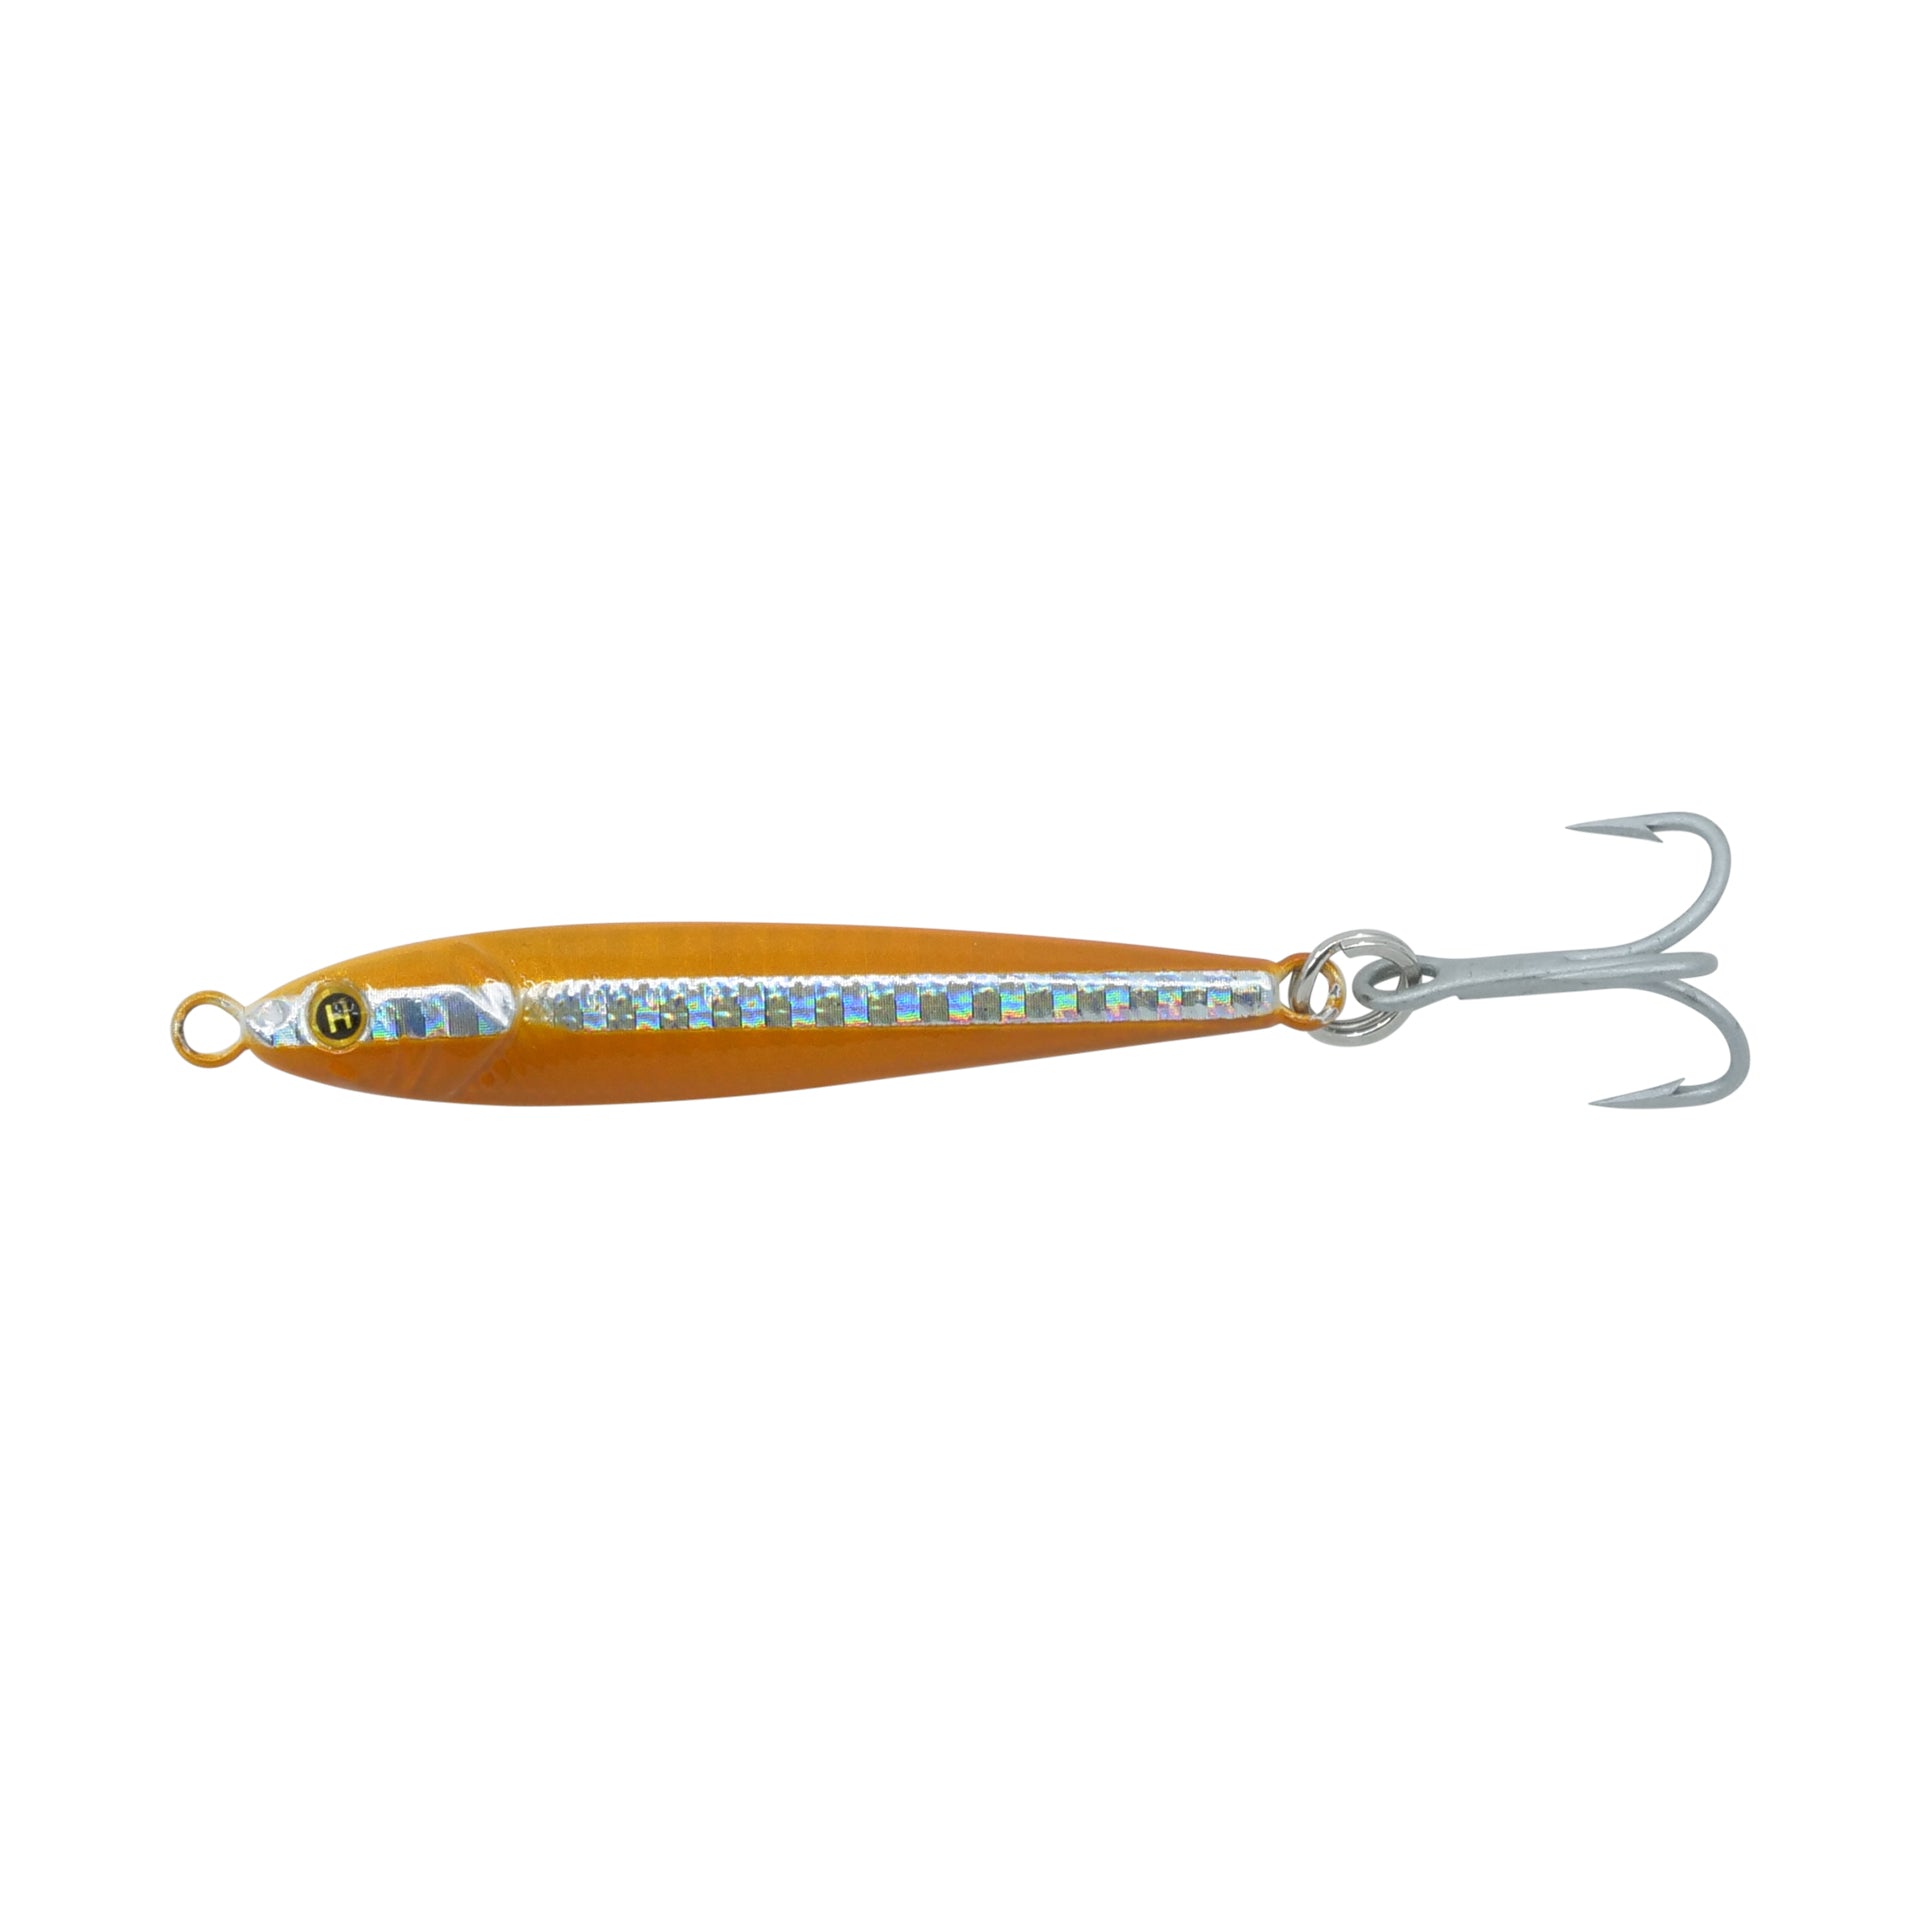 Run Off Lures Herring Peanut Bunker Jig 3oz Chrome Silver - Canal Bait and  Tackle